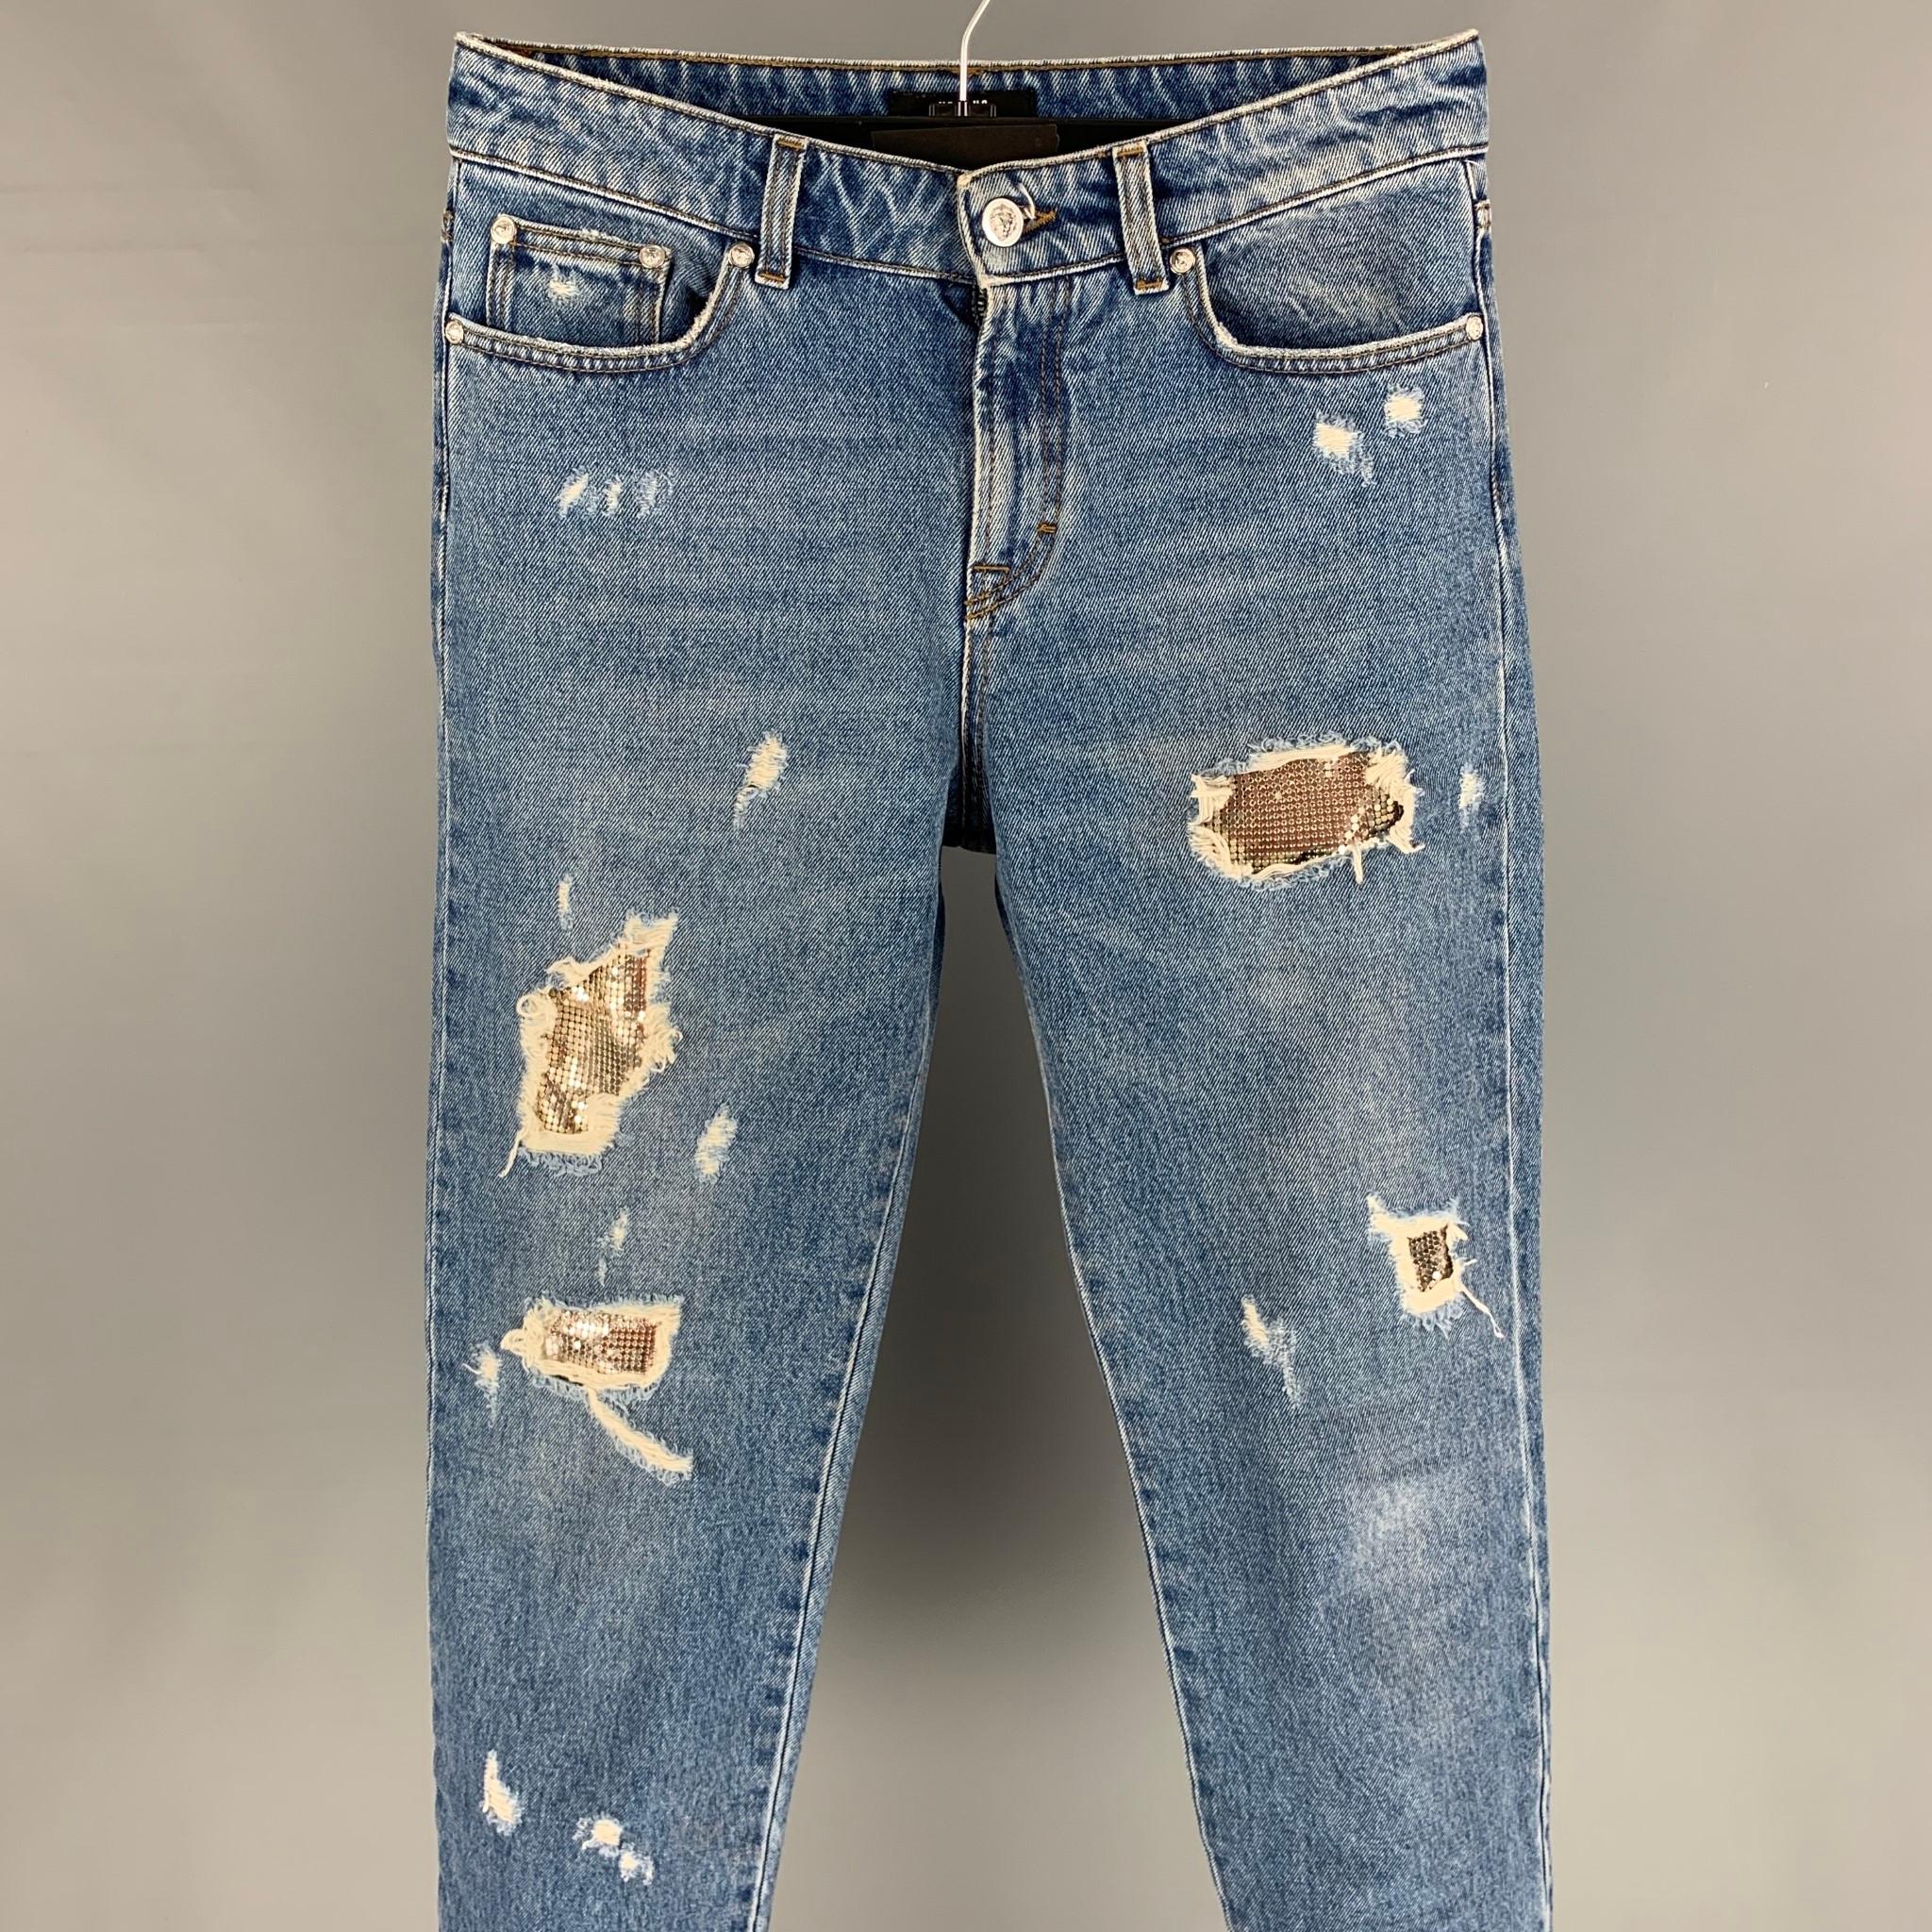 VERSUS by GIANNI VERSACE jeans comes in a indigo distressed denim featuring a underlay metal design, contrast stitching, silver tone buttons, and a zip fly closure. Made in Romania. 

Excellent Pre-Owned Condition.
Marked: 27

Measurements:

Waist: